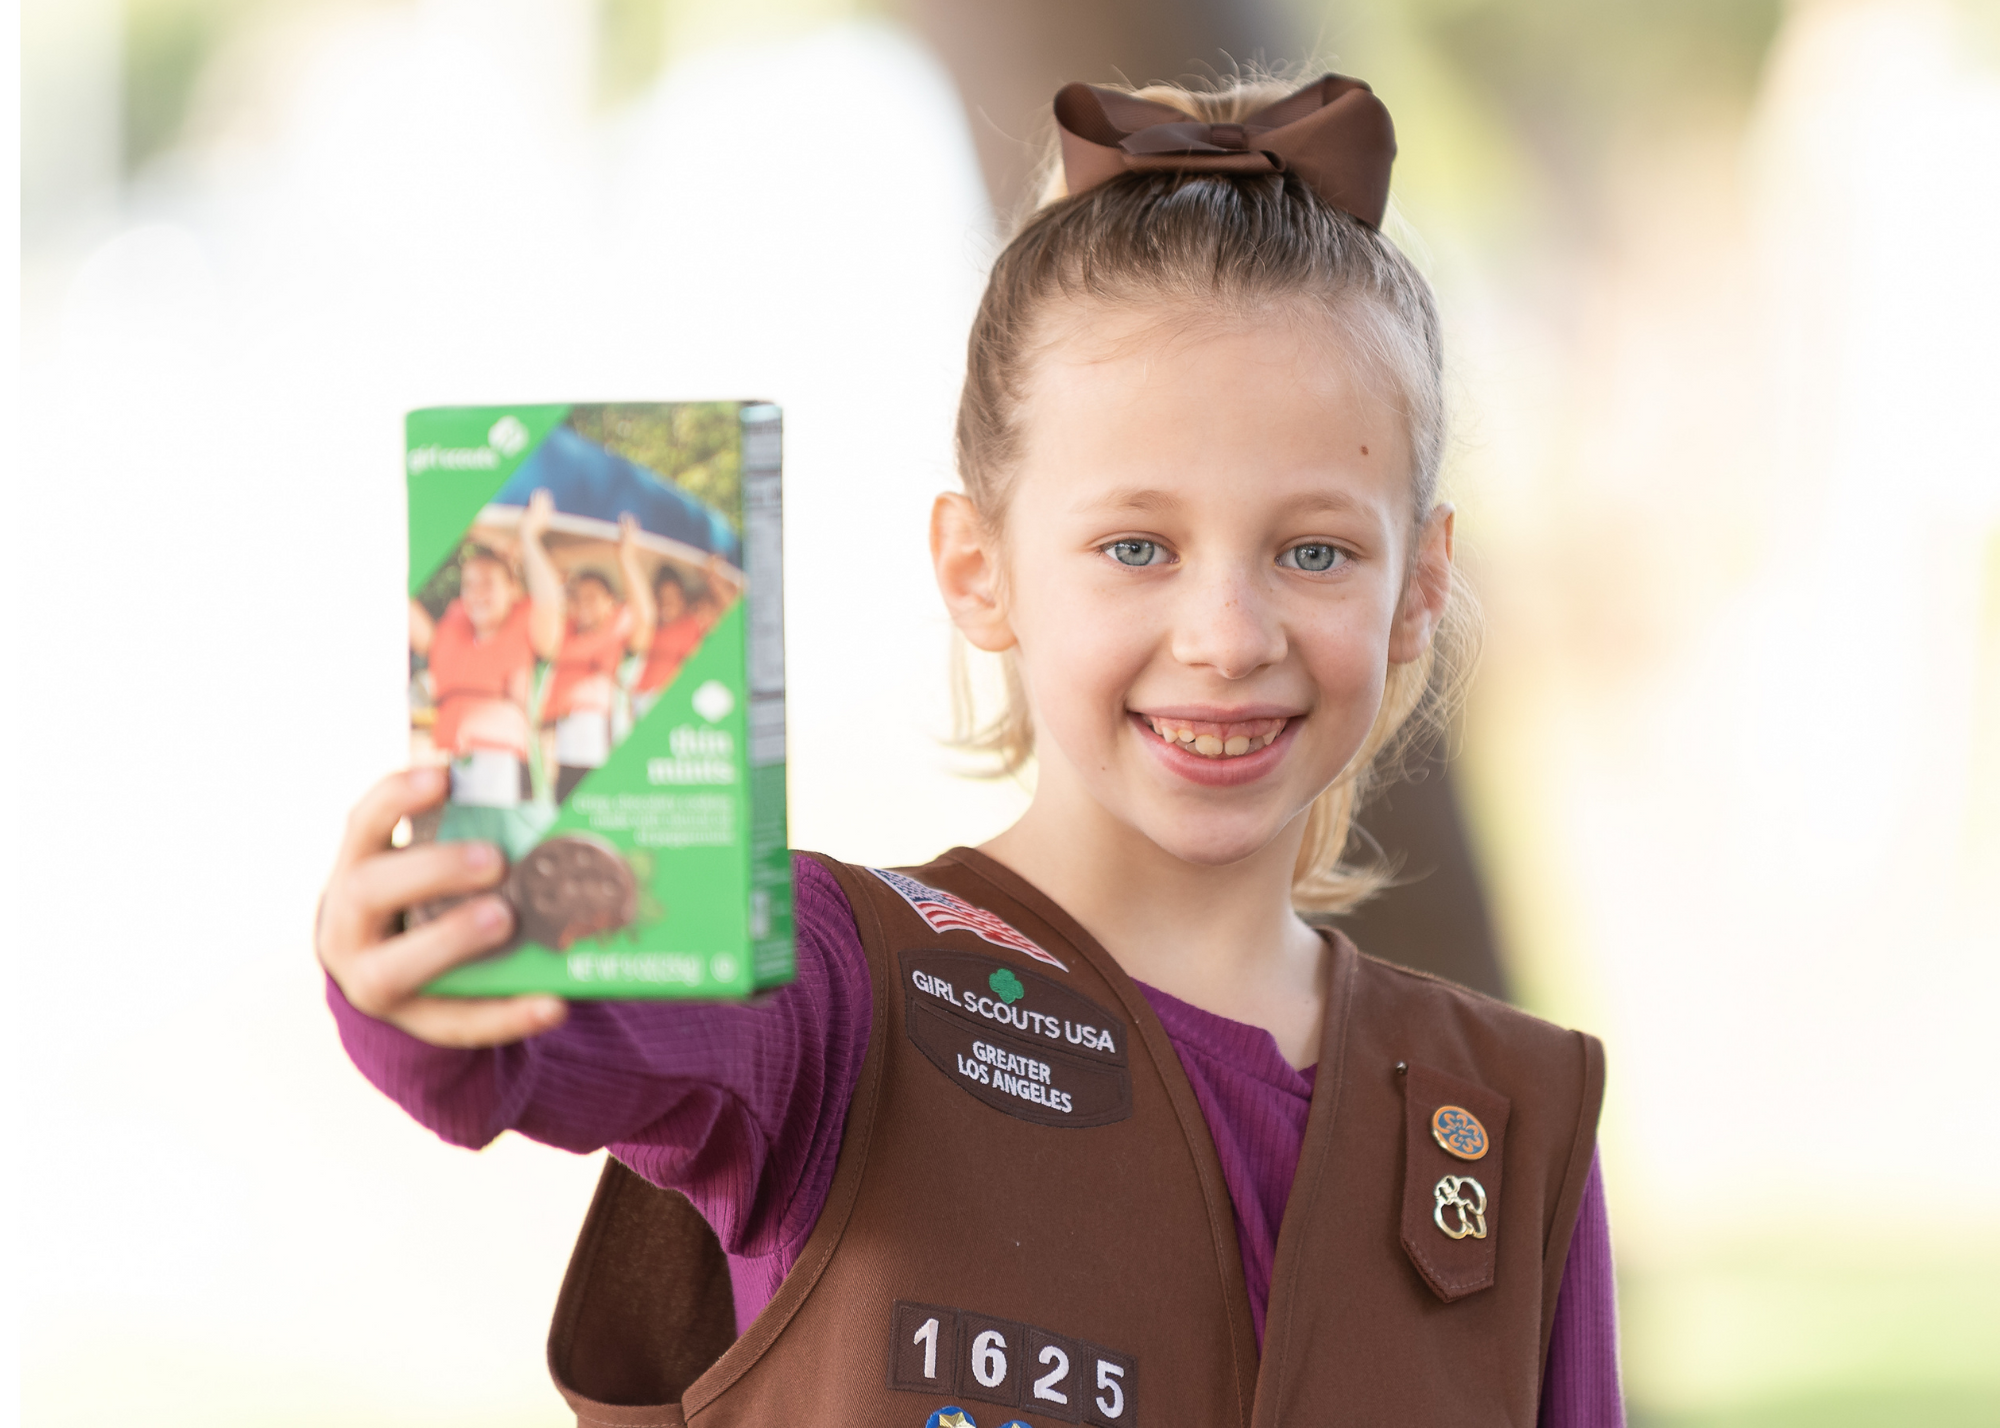 Local Girl Scouts turn to digital storefronts for this year’s cookie season…and links to purchase cookies from local troops!